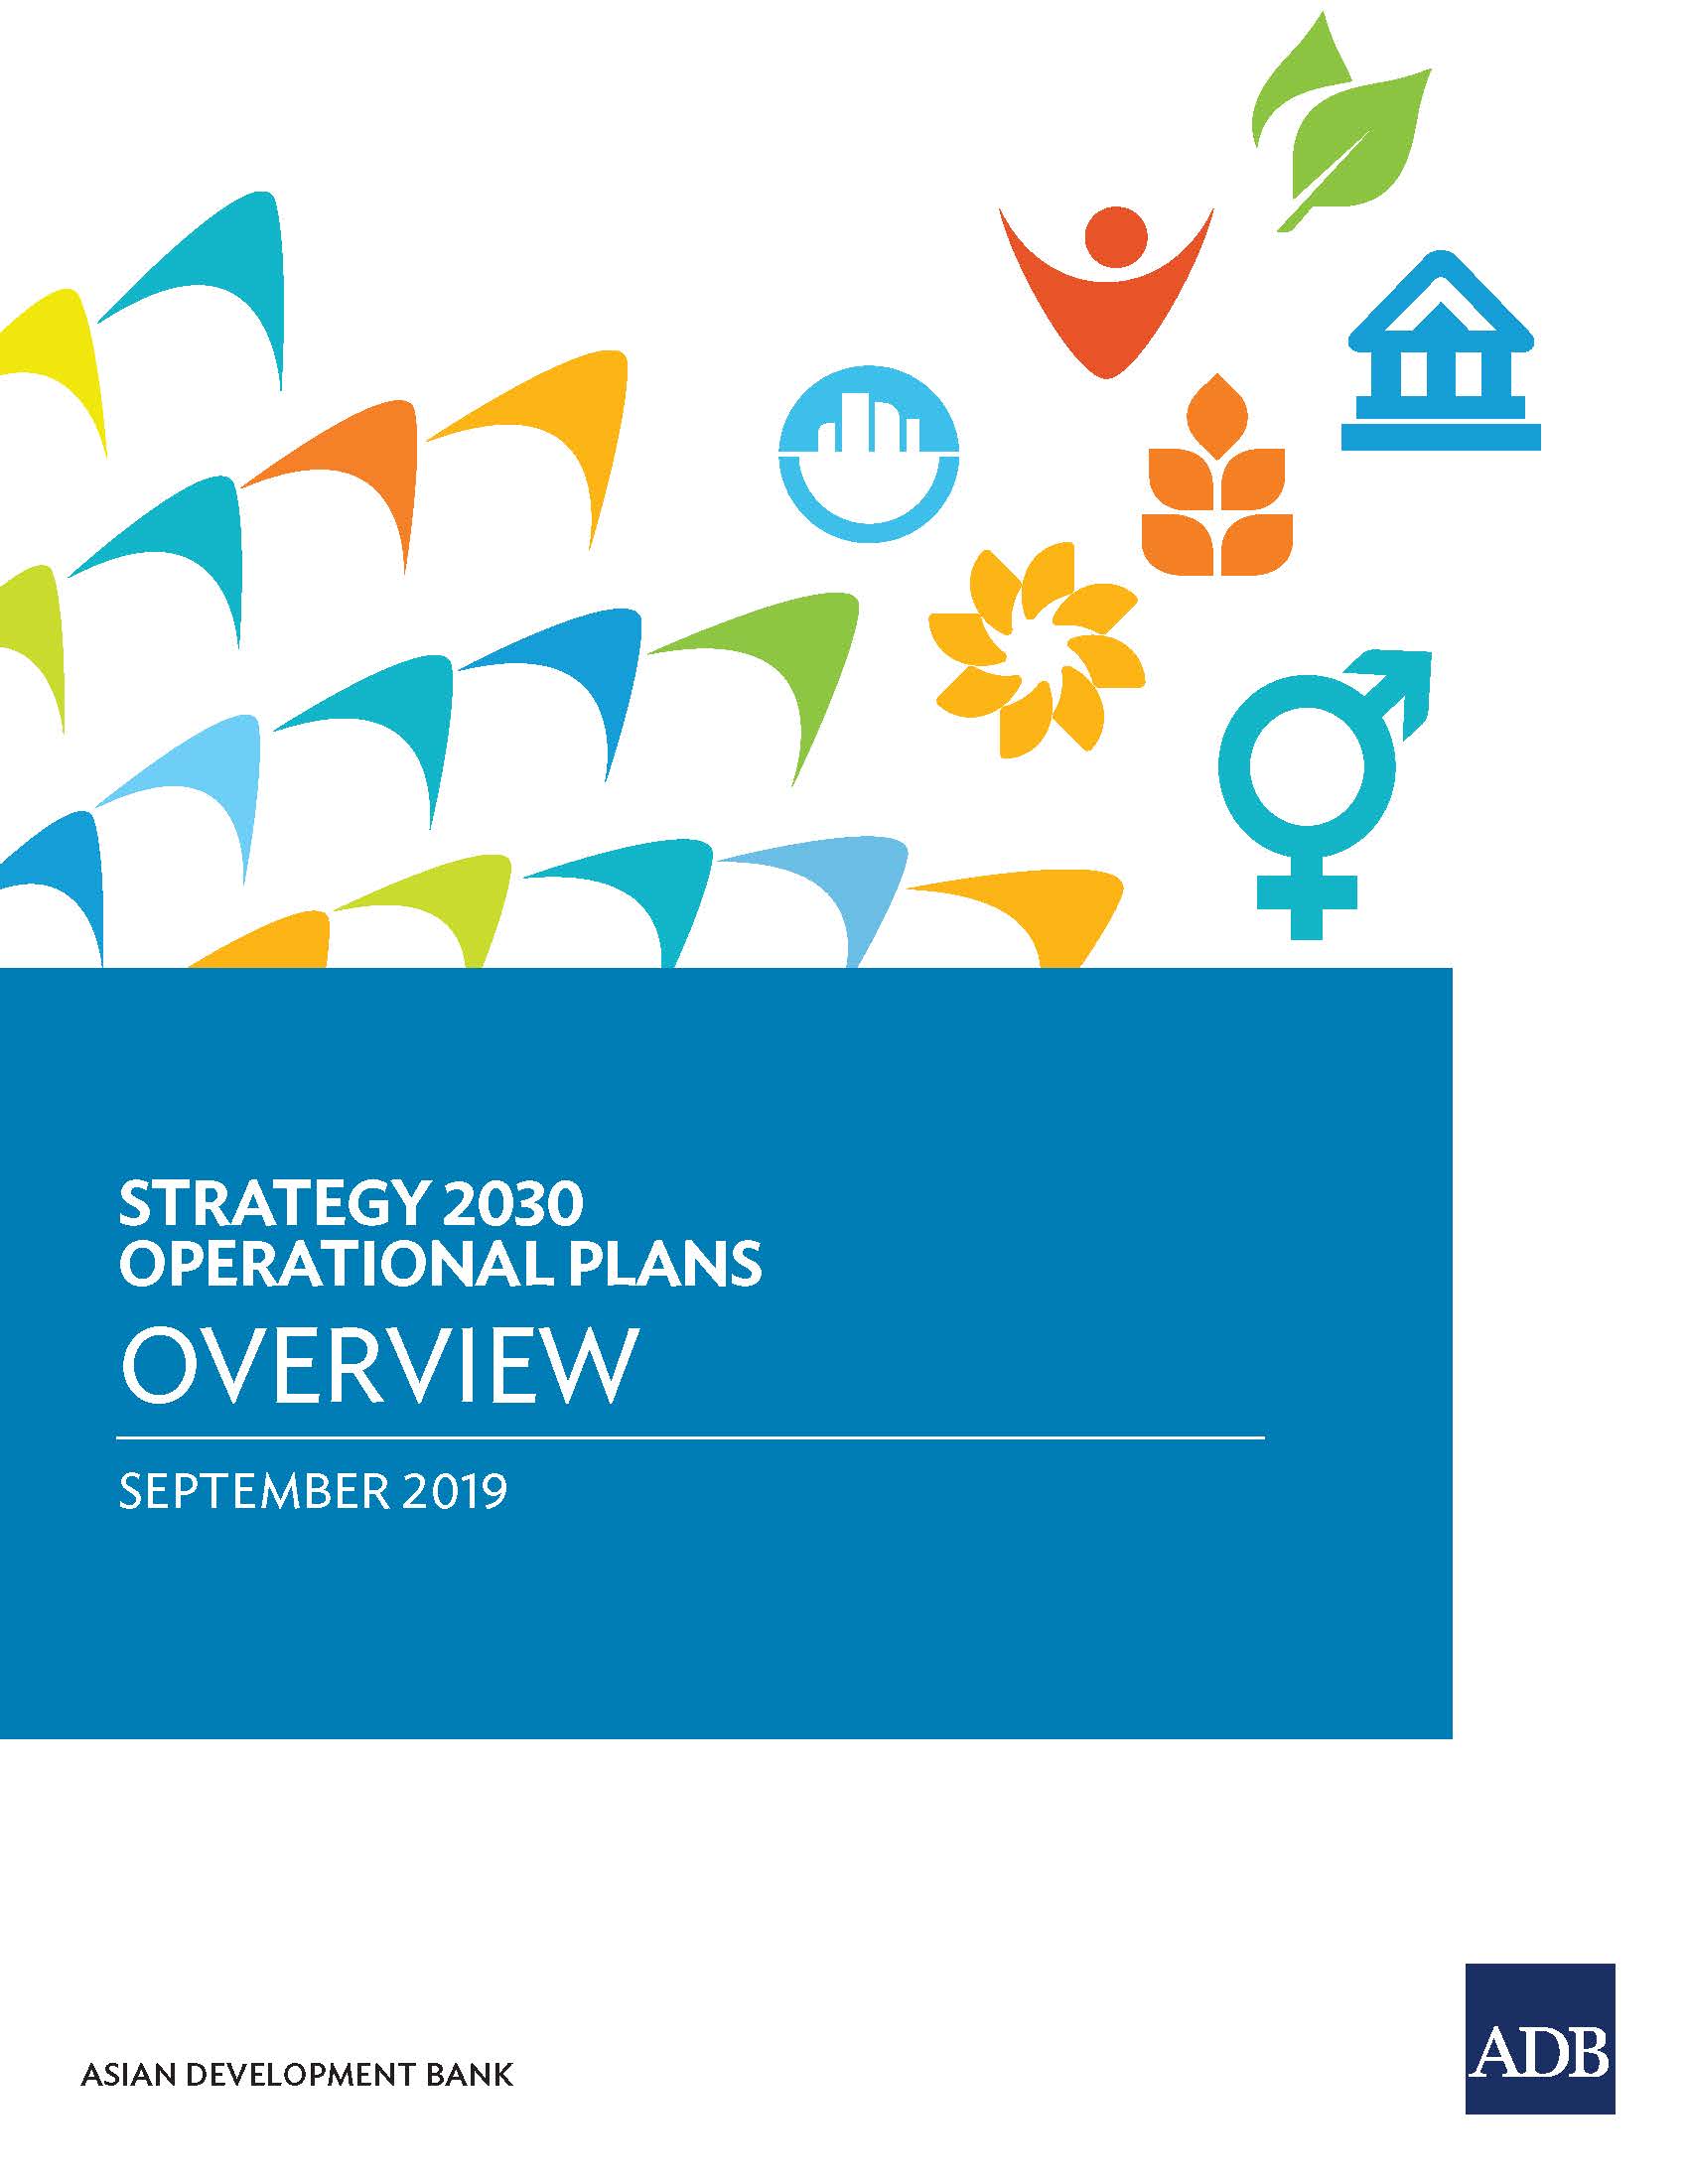 Strategy 2030 Operational Plans Overview